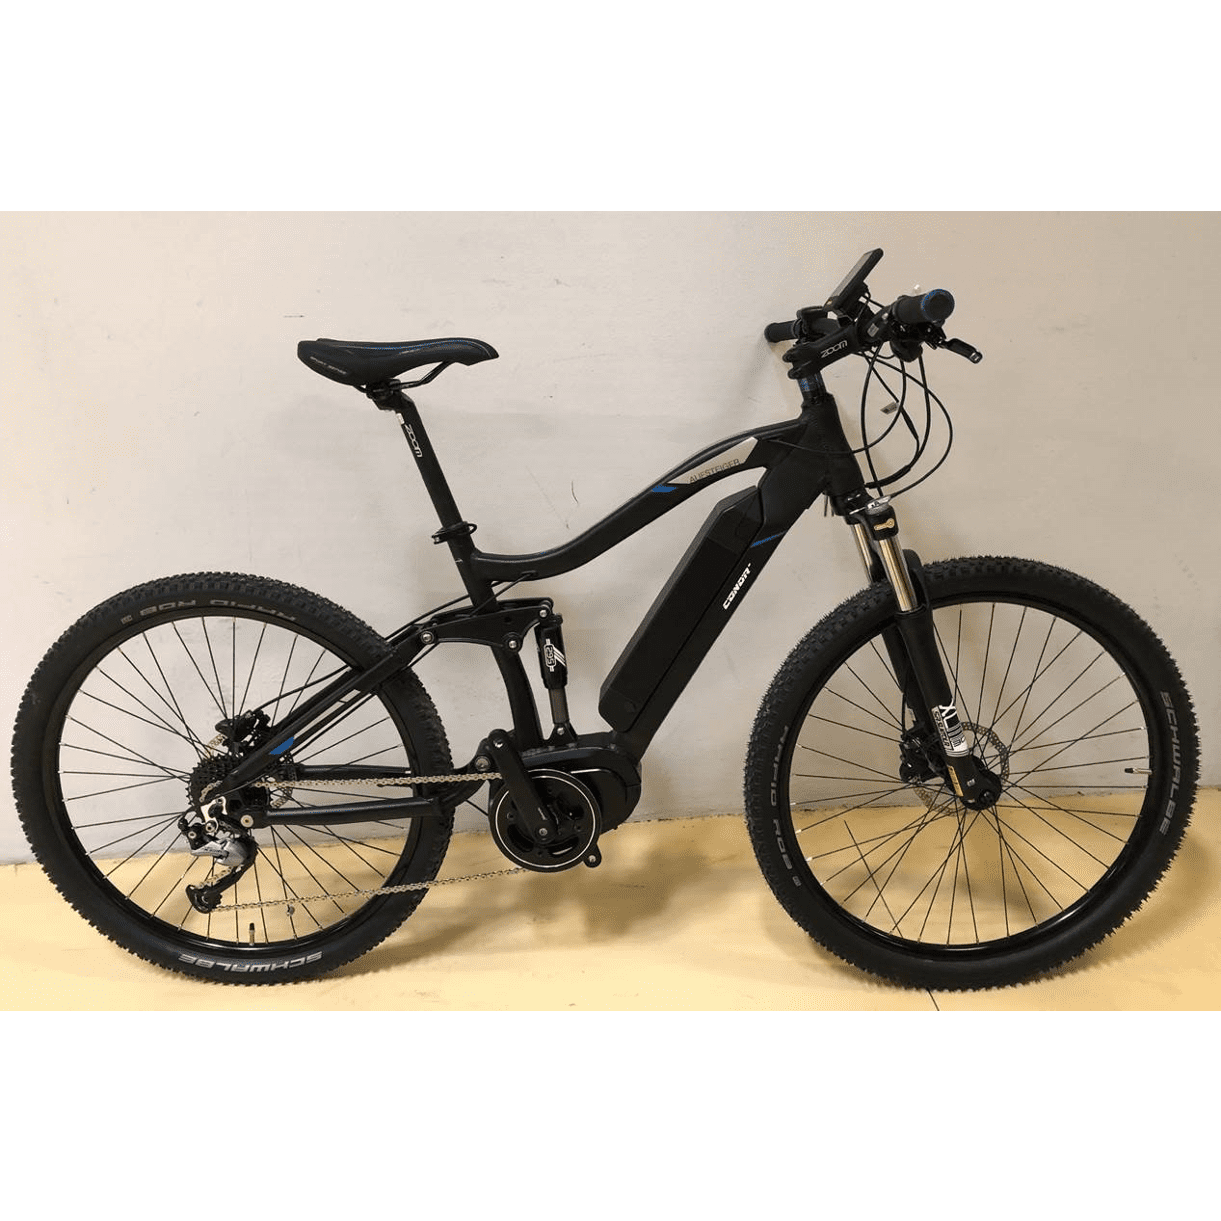 Conor Bici Electrica | vlr.eng.br